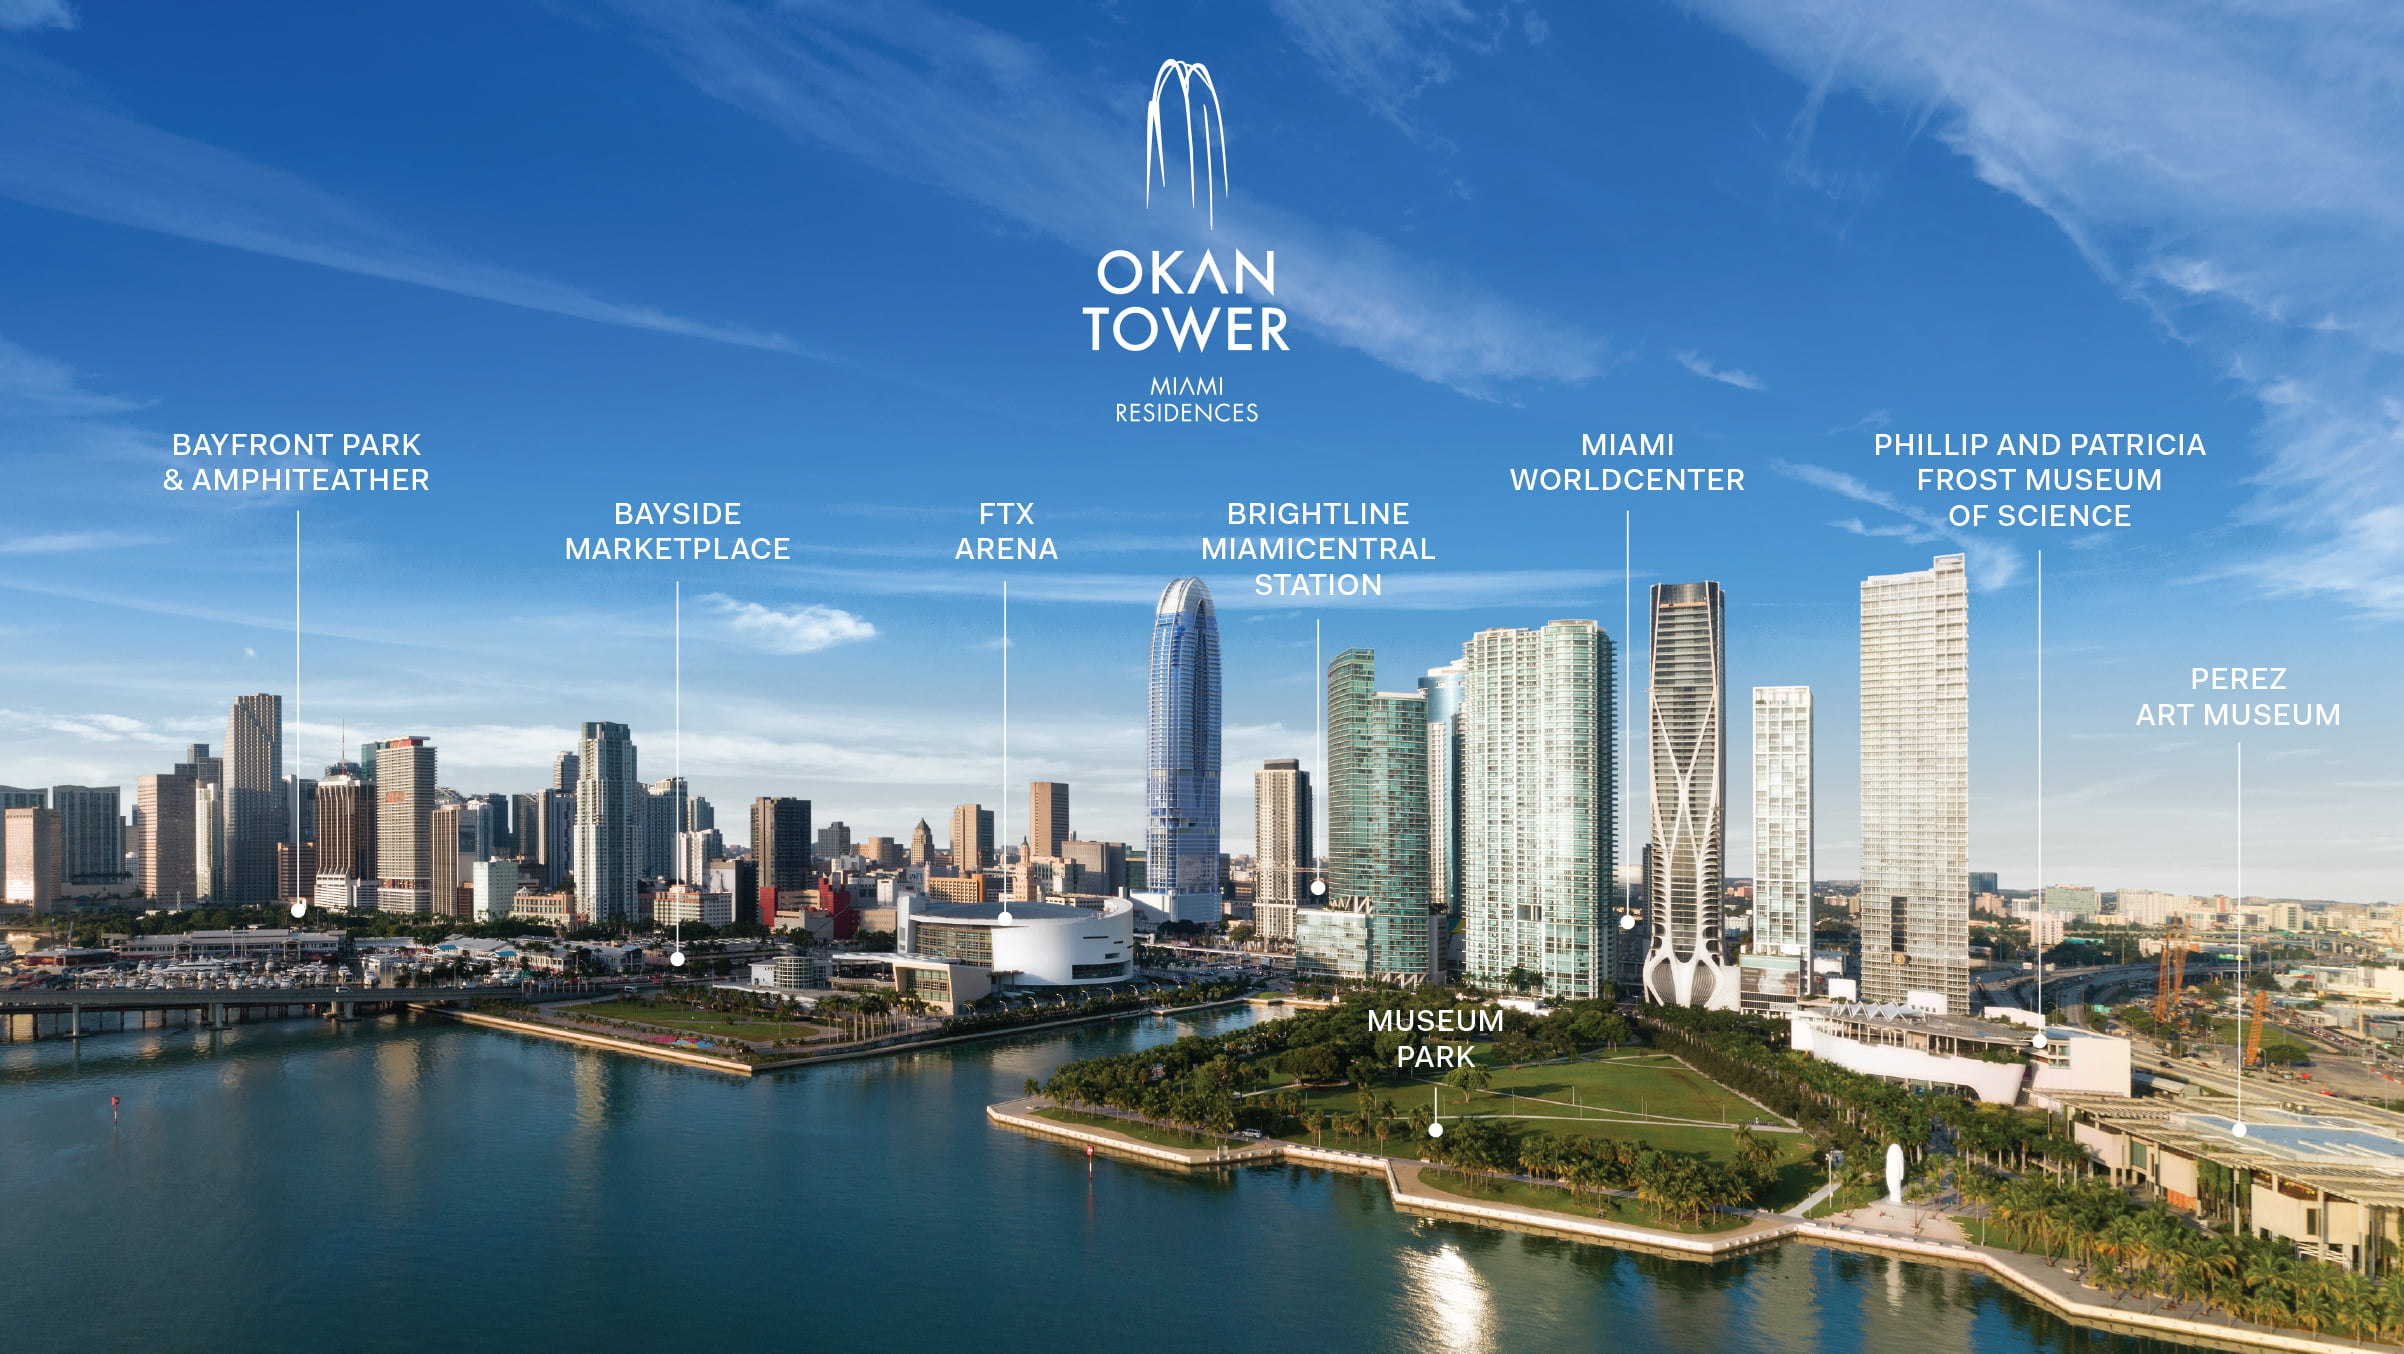 Downtown Miami skyscape with Okan Tower at the center. New Development in Miami